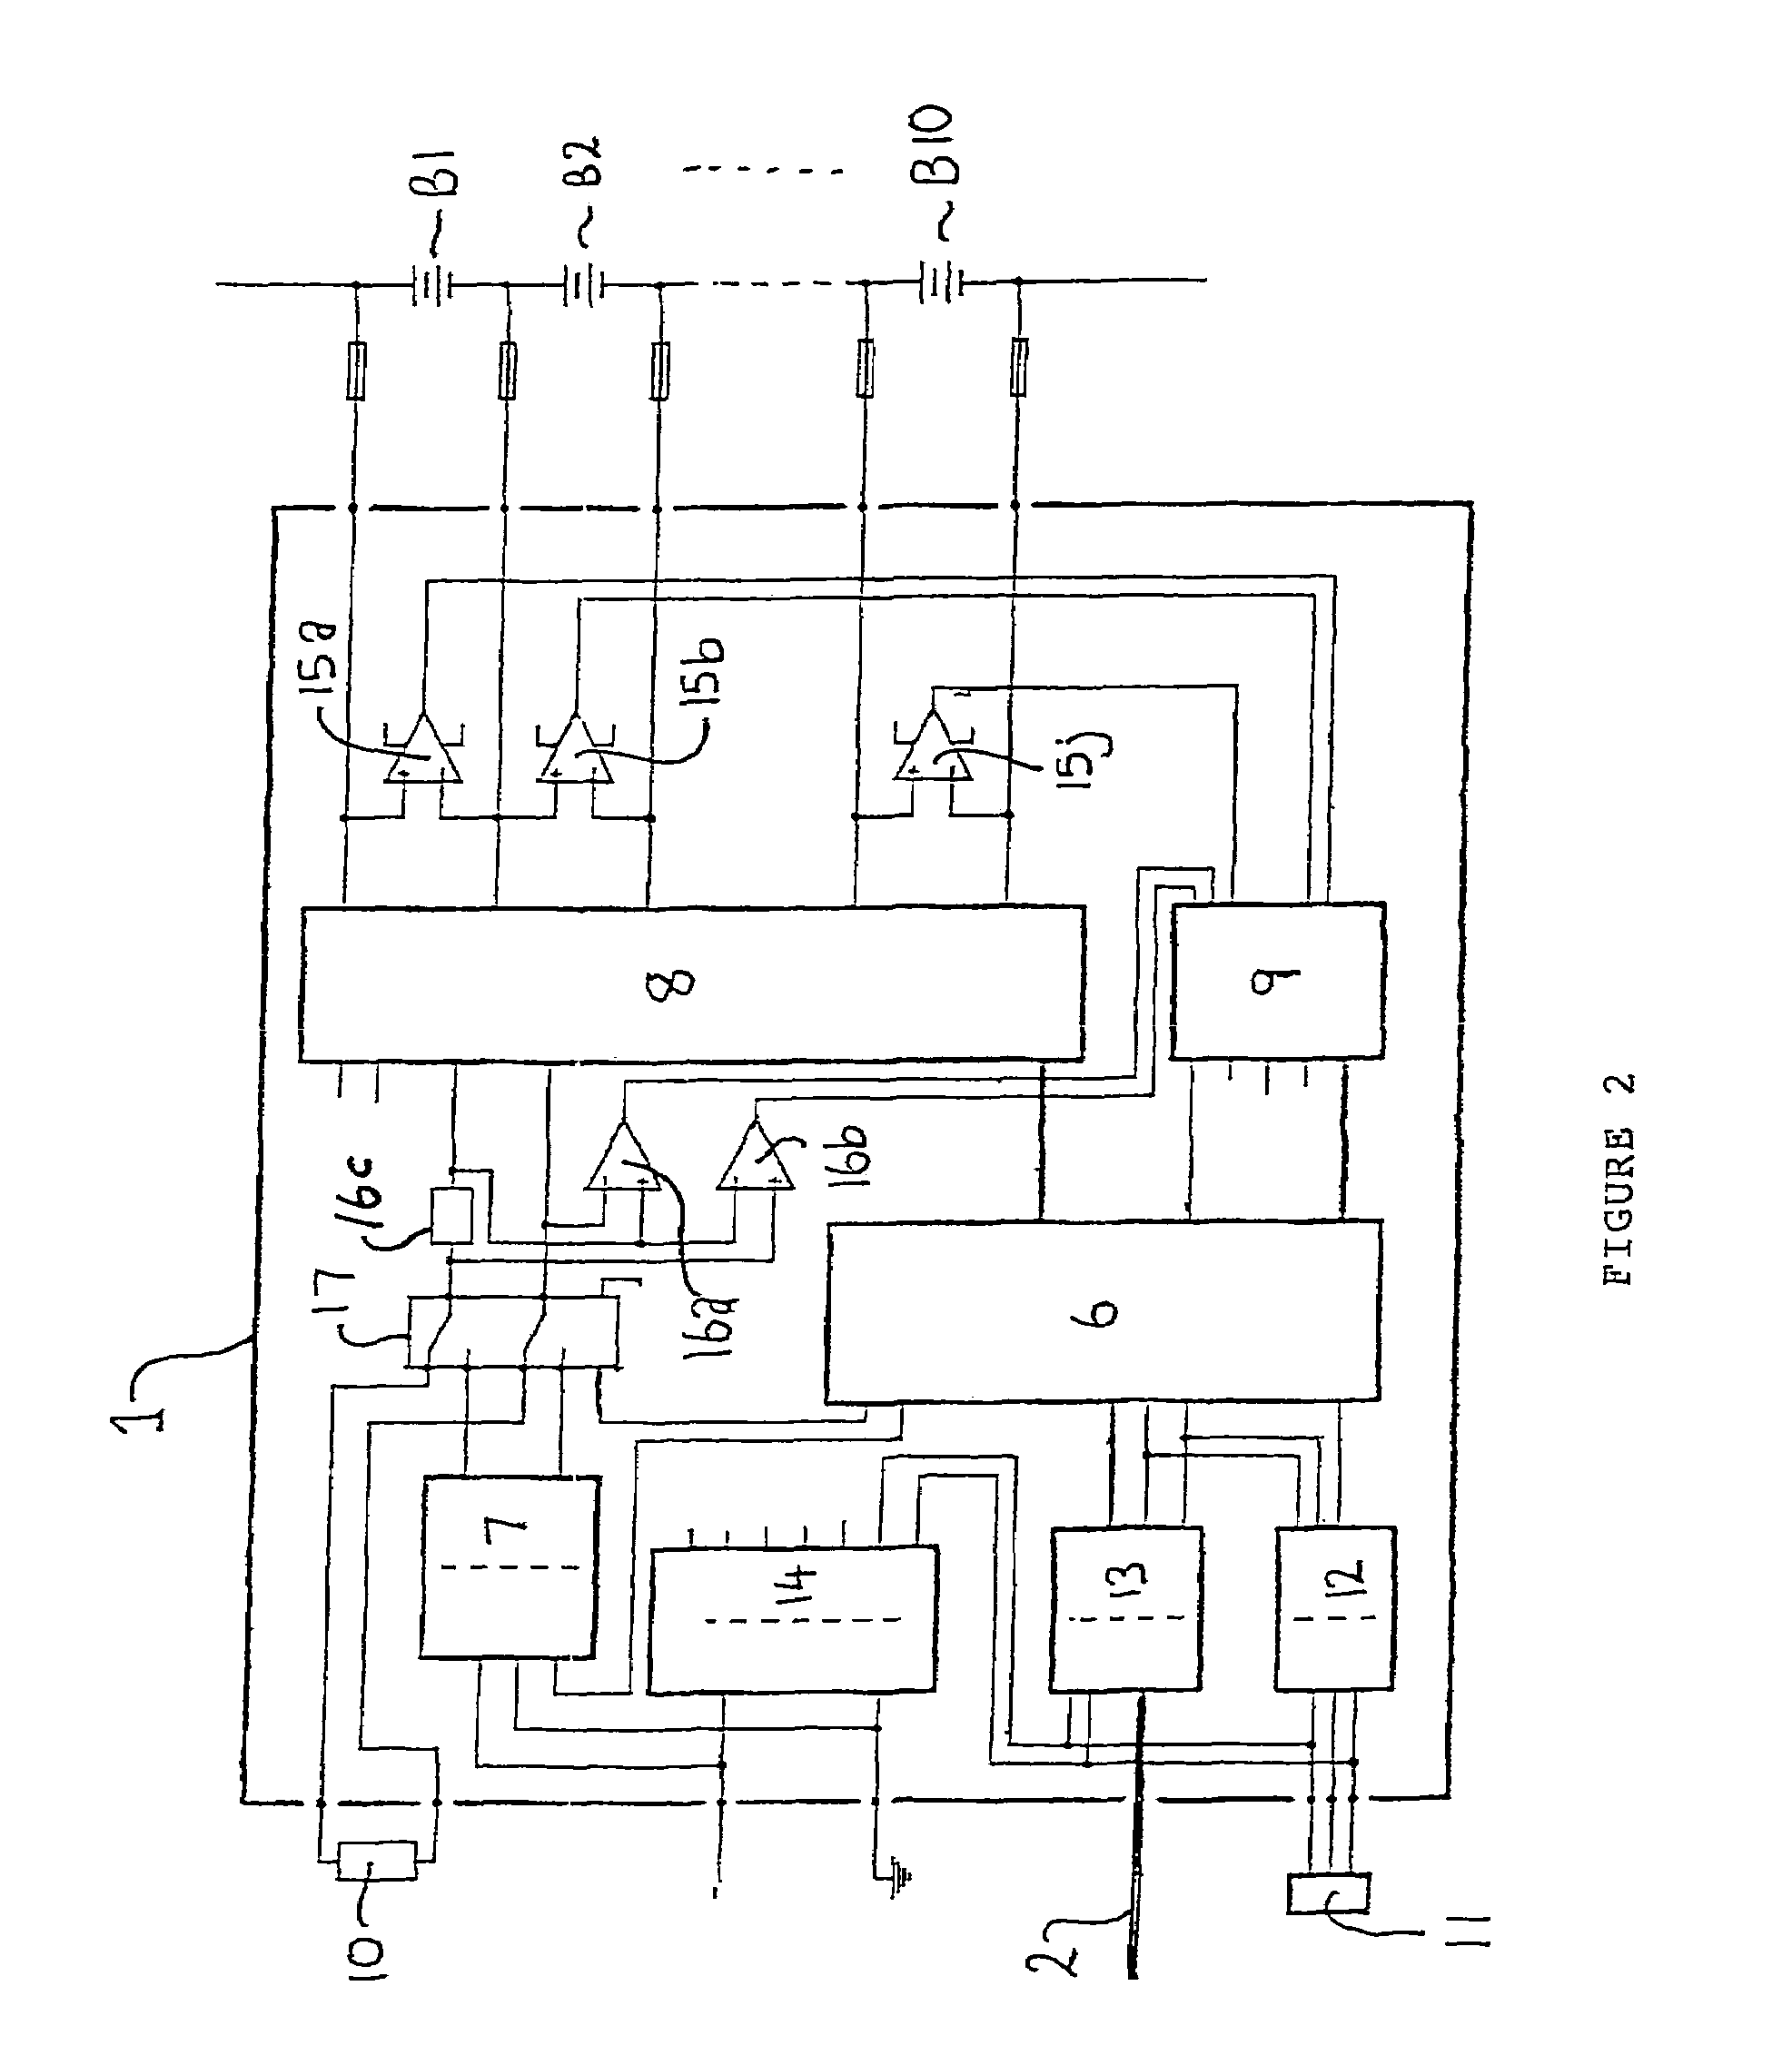 Battery management unit, system and method